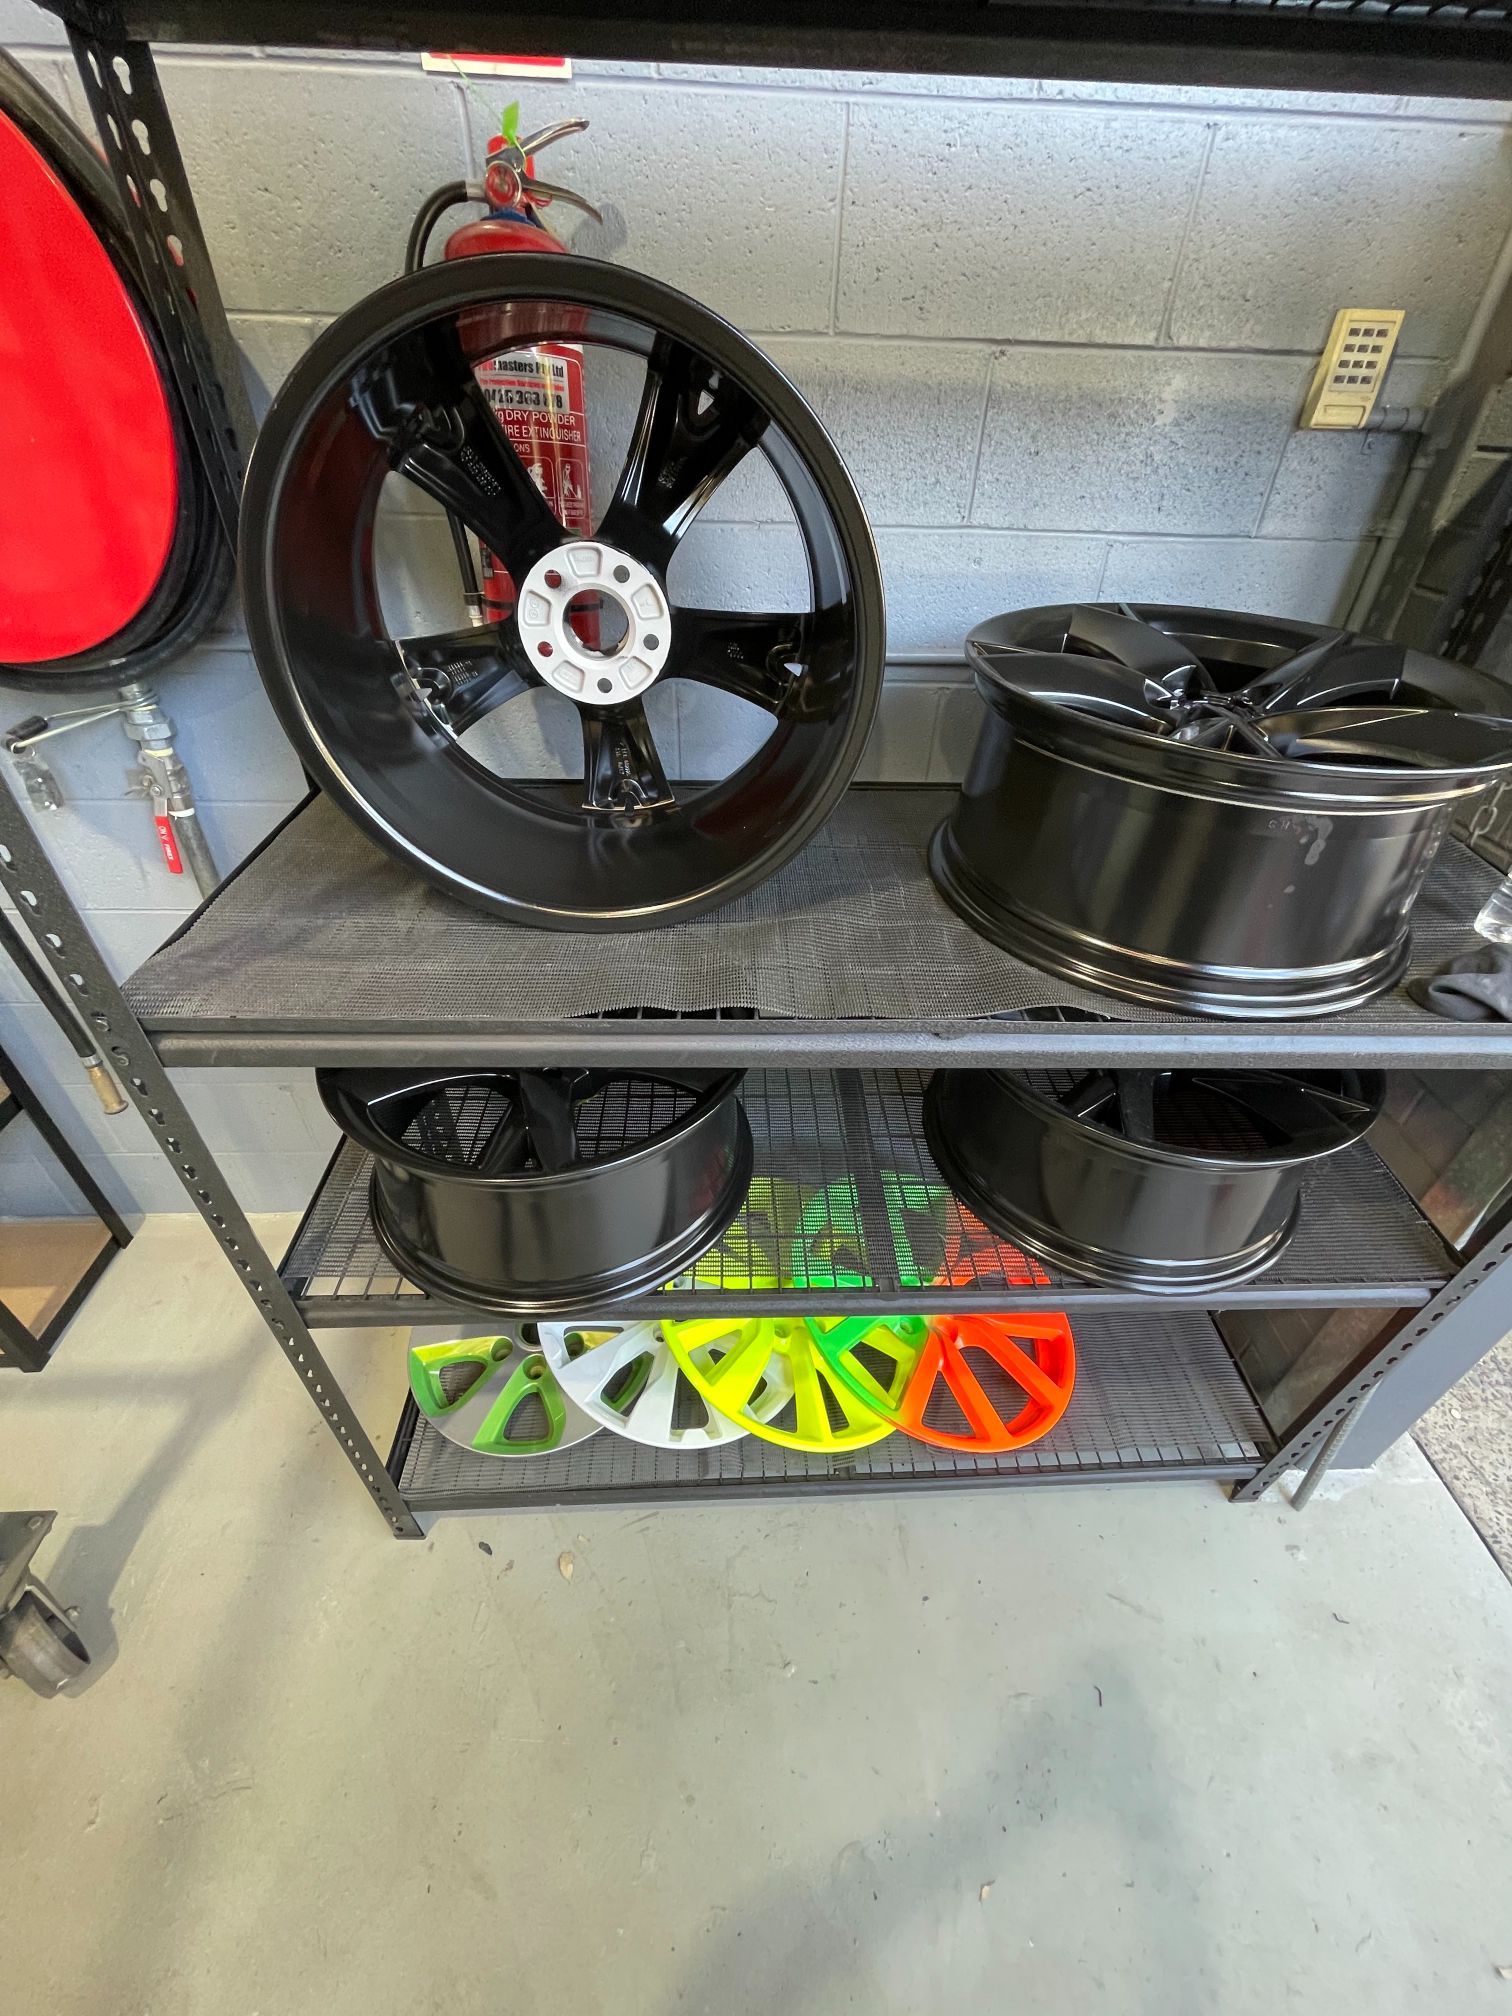 Display rims and wheels for powder coating services Sydney